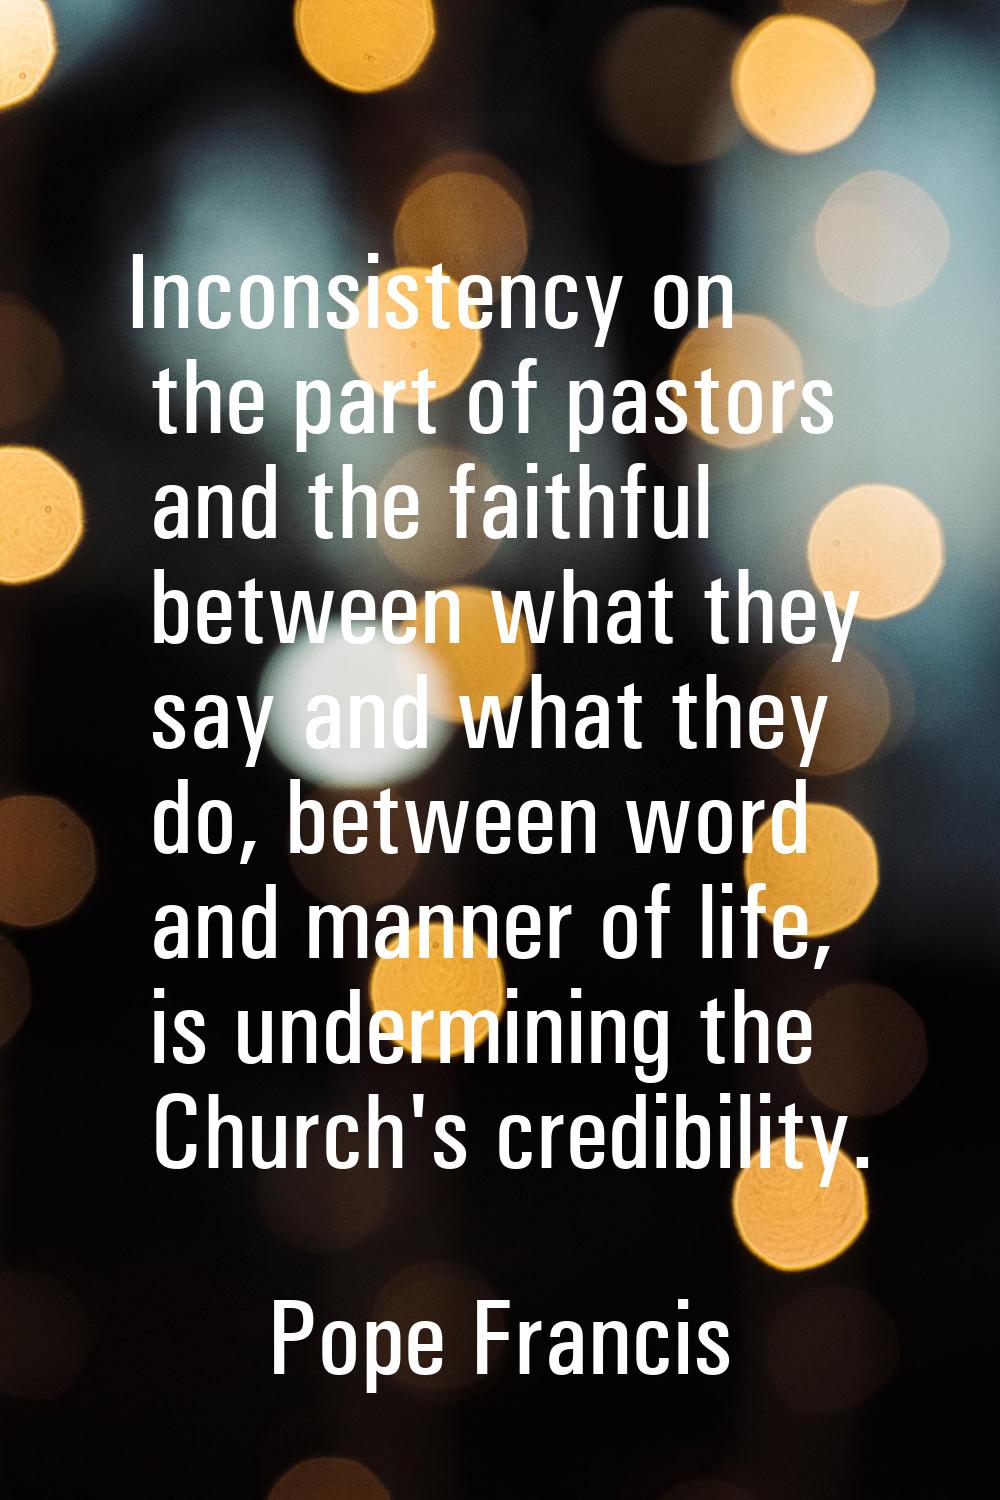 Inconsistency on the part of pastors and the faithful between what they say and what they do, betwe